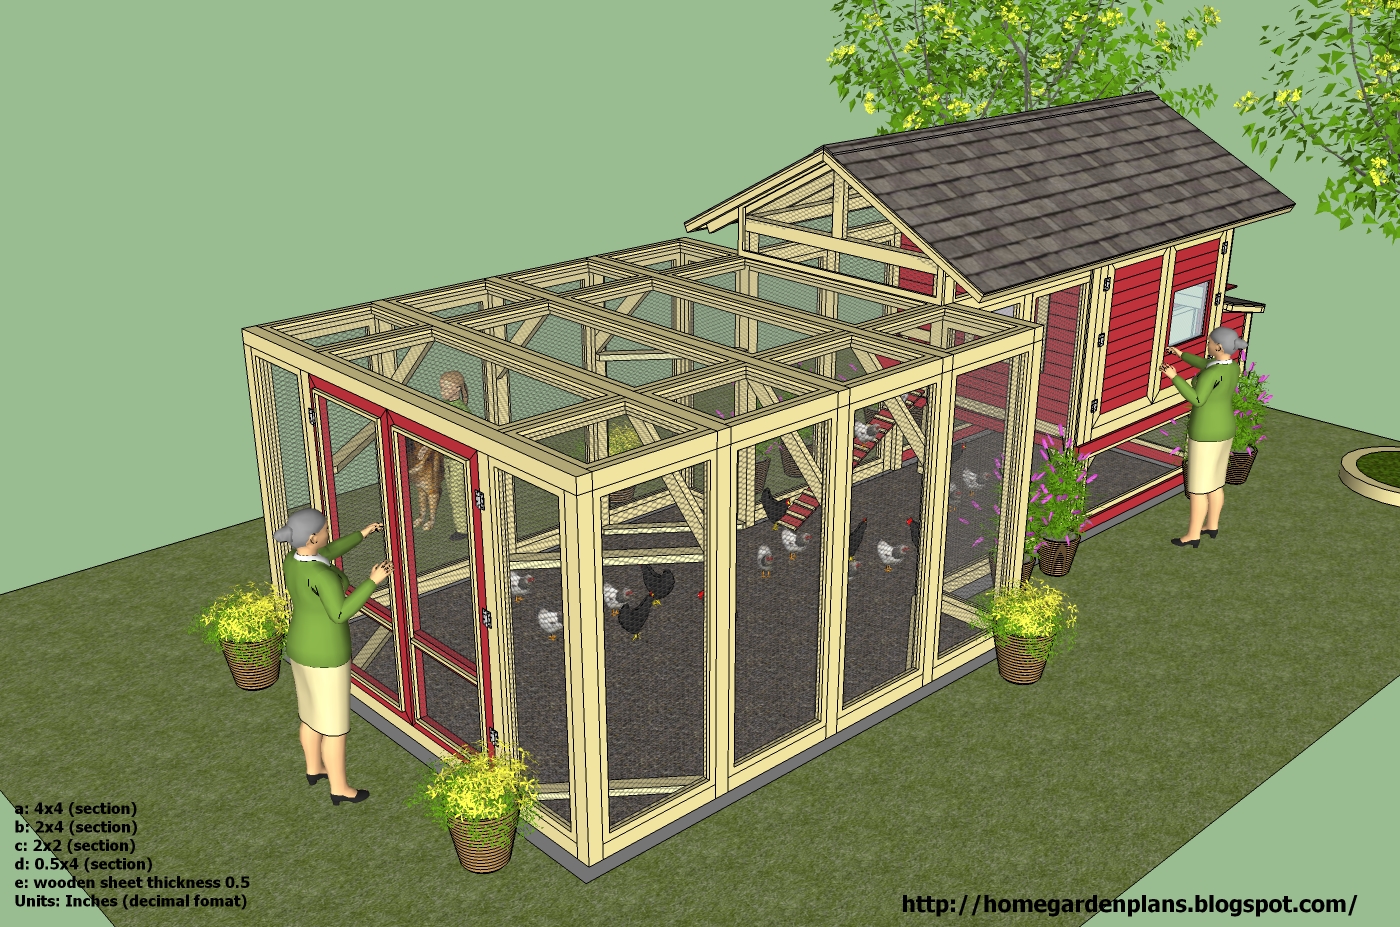 L101 - Large Chicken Coop Plans - How to build a Chicken Coop